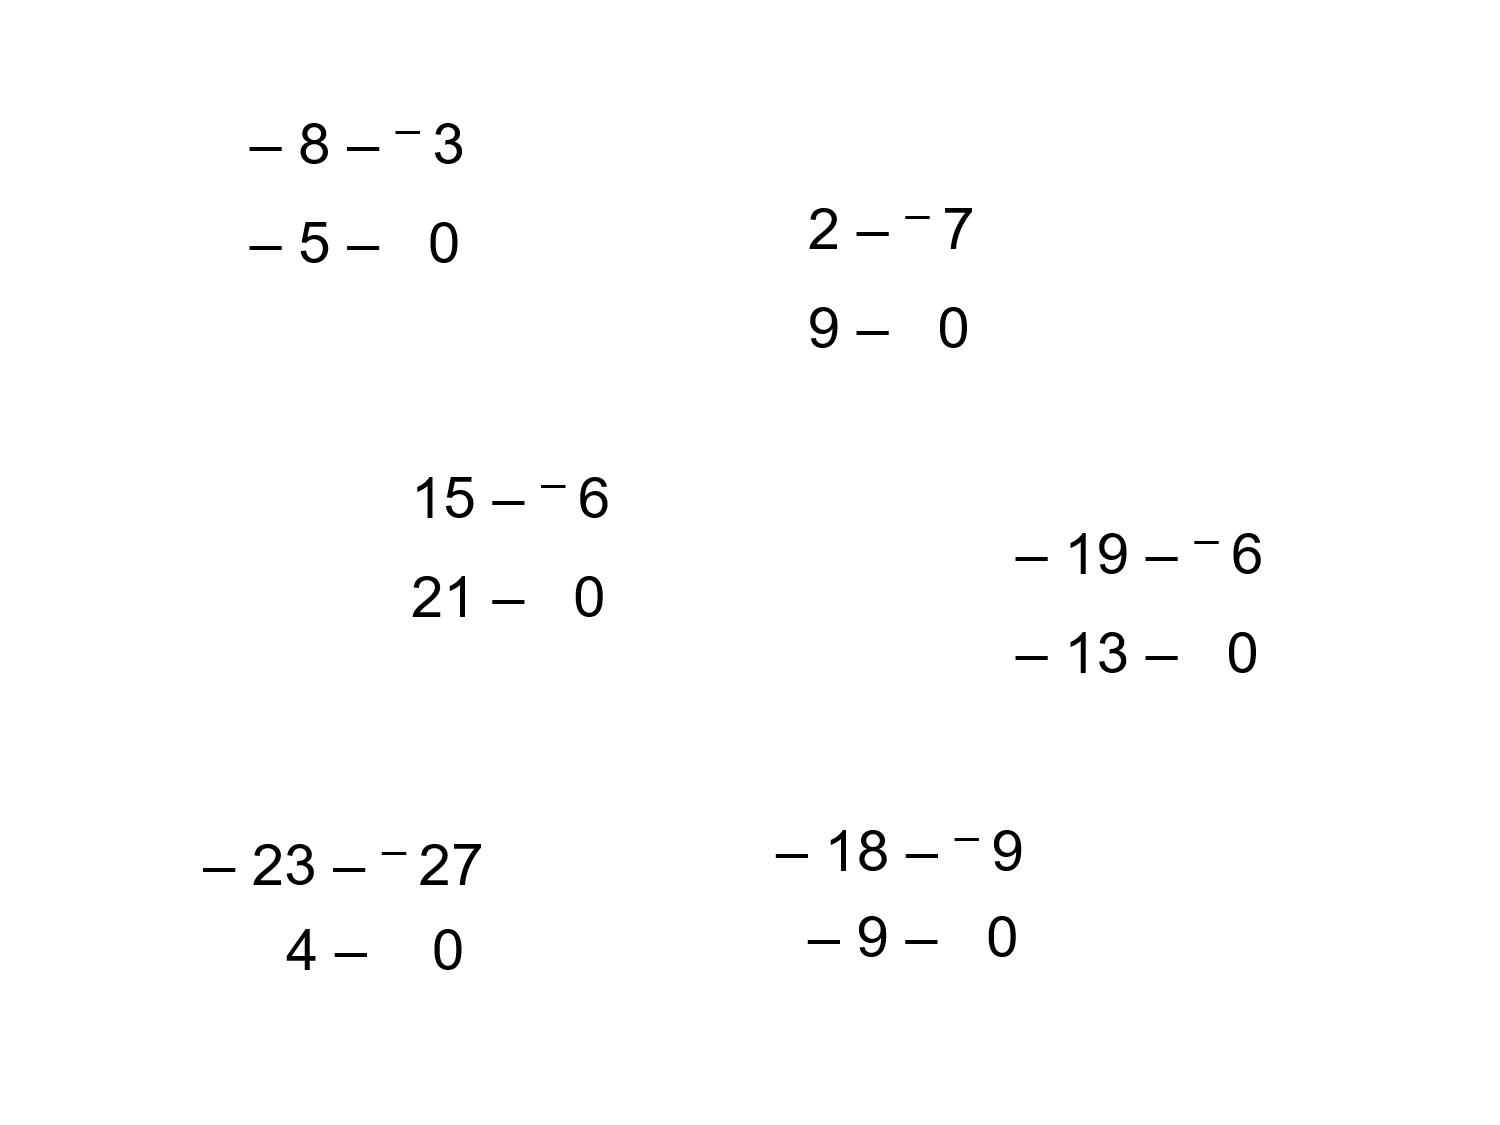 median-don-steward-mathematics-teaching-directed-number-addition-and-subtraction-2-of-2